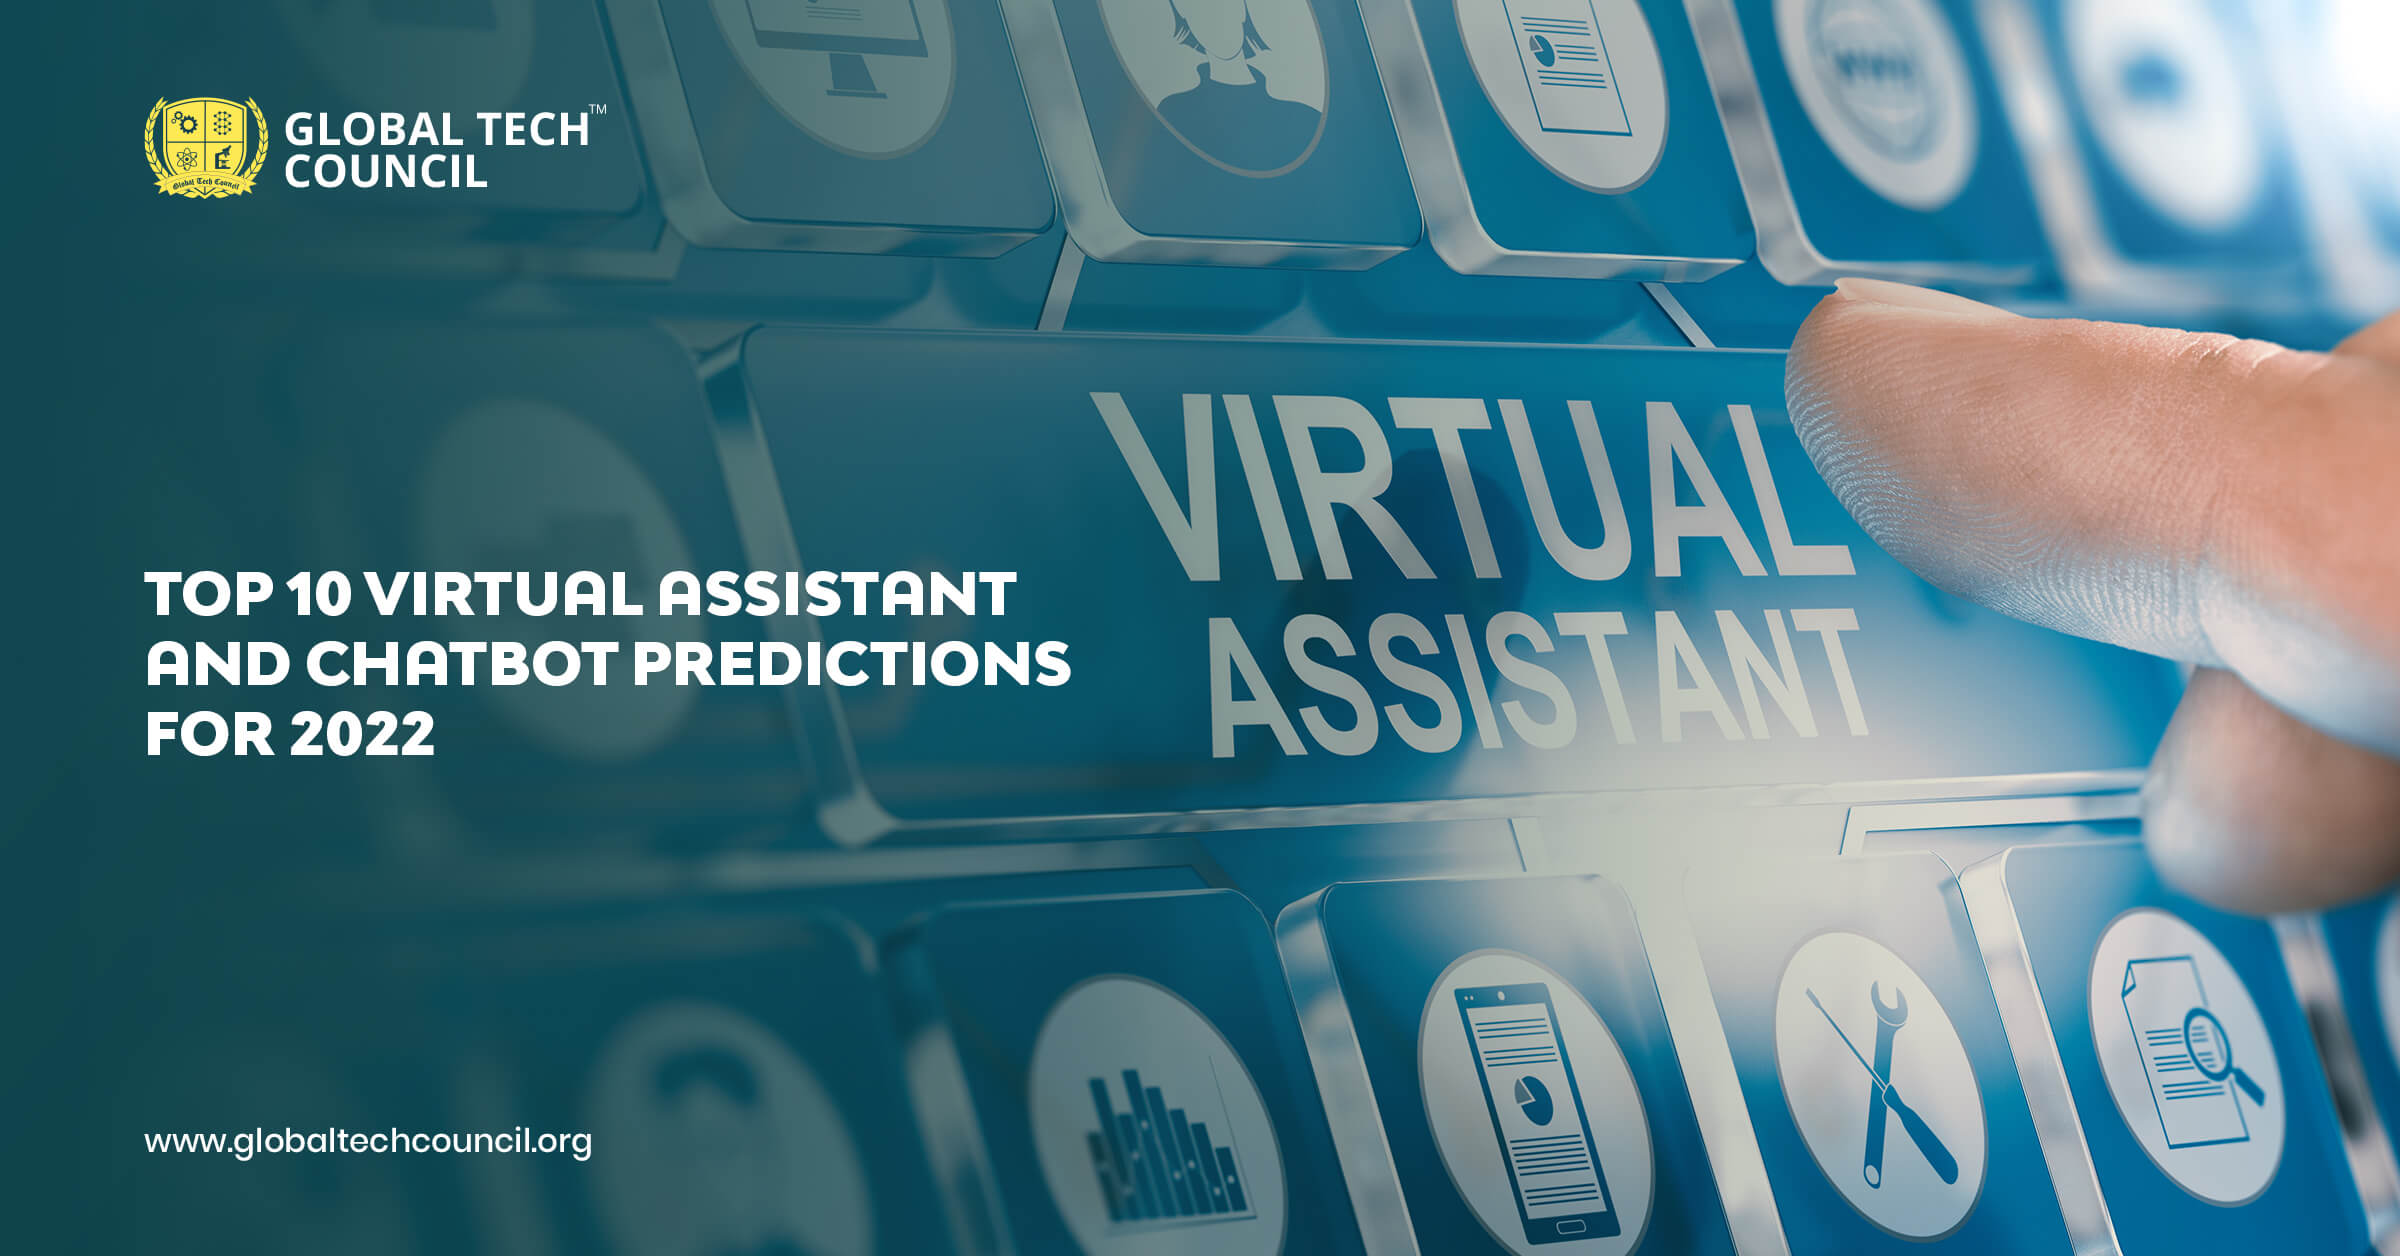 TOP 10 VIRTUAL ASSISTANT AND CHATBOT PREDICTIONS FOR 2022